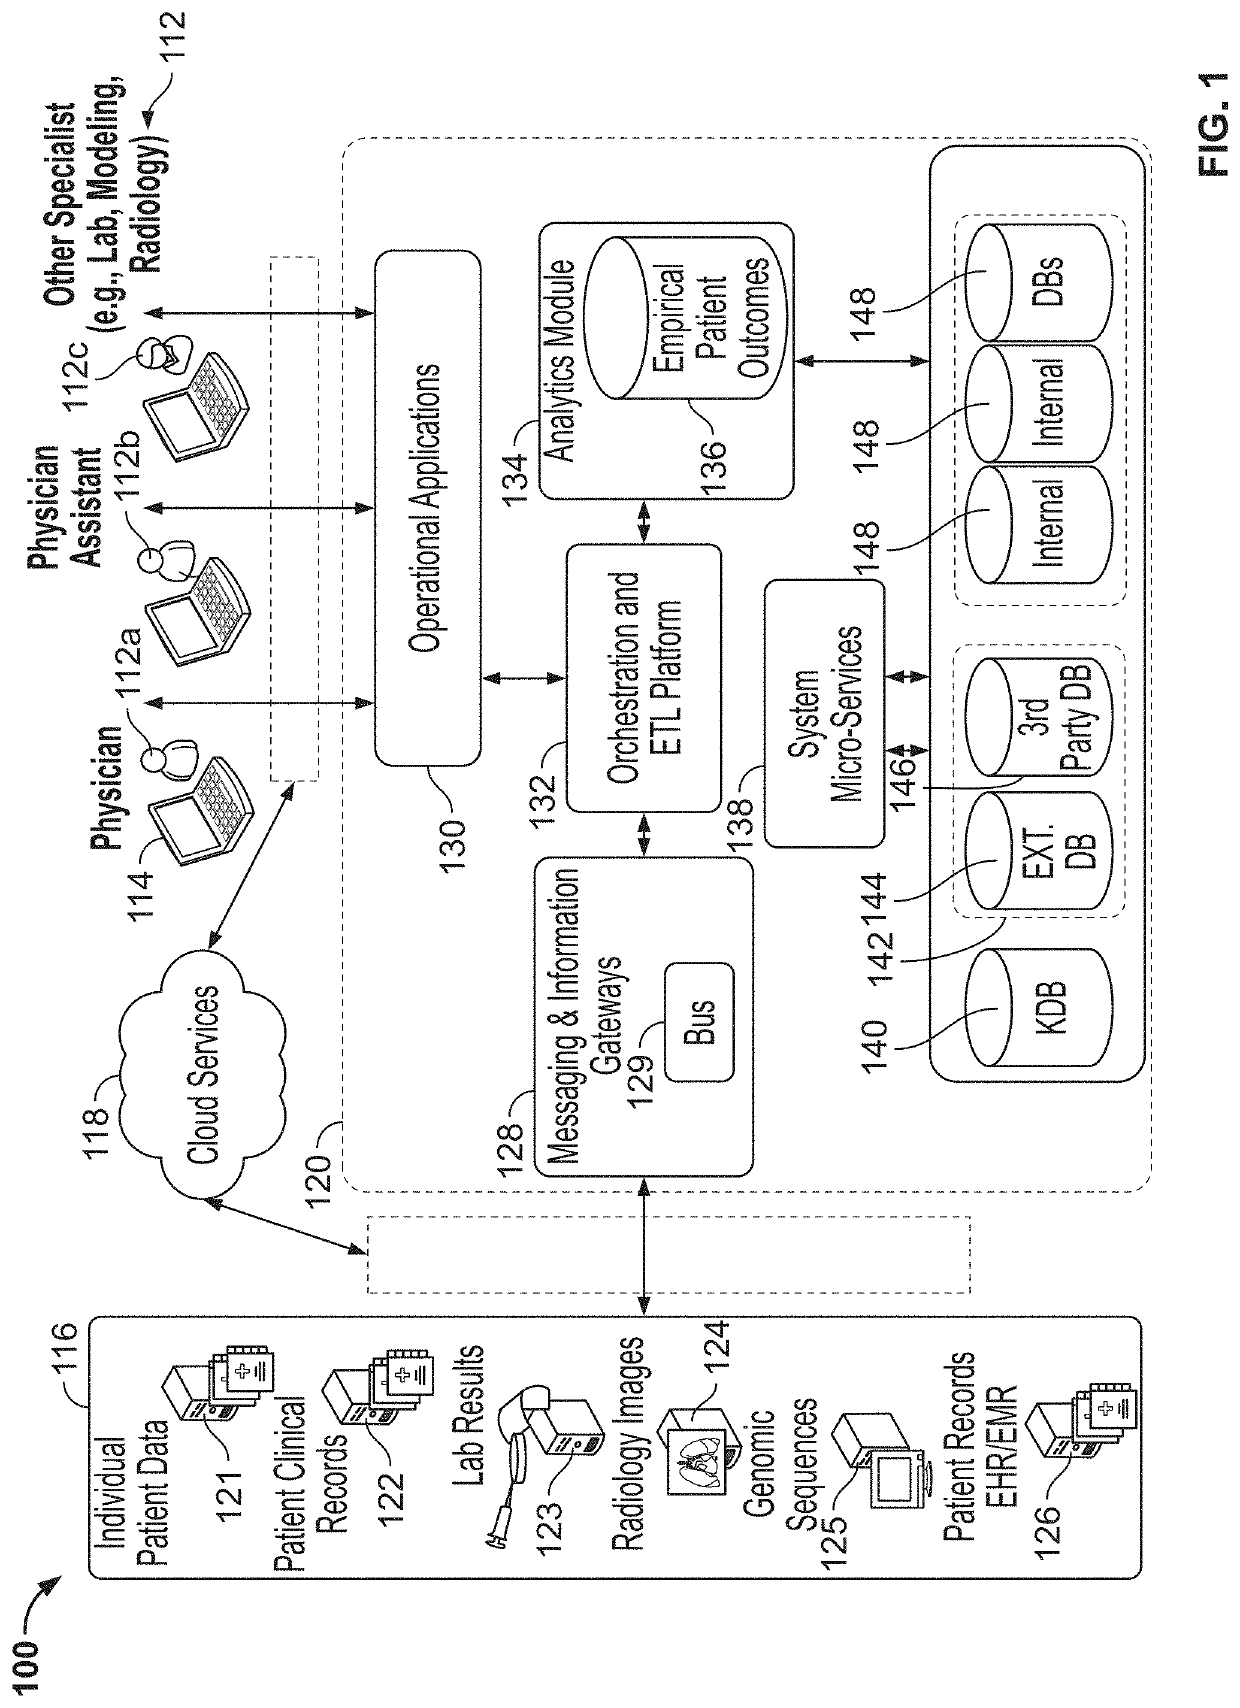 Systems and methods for interrogating clinical documents for characteristic data